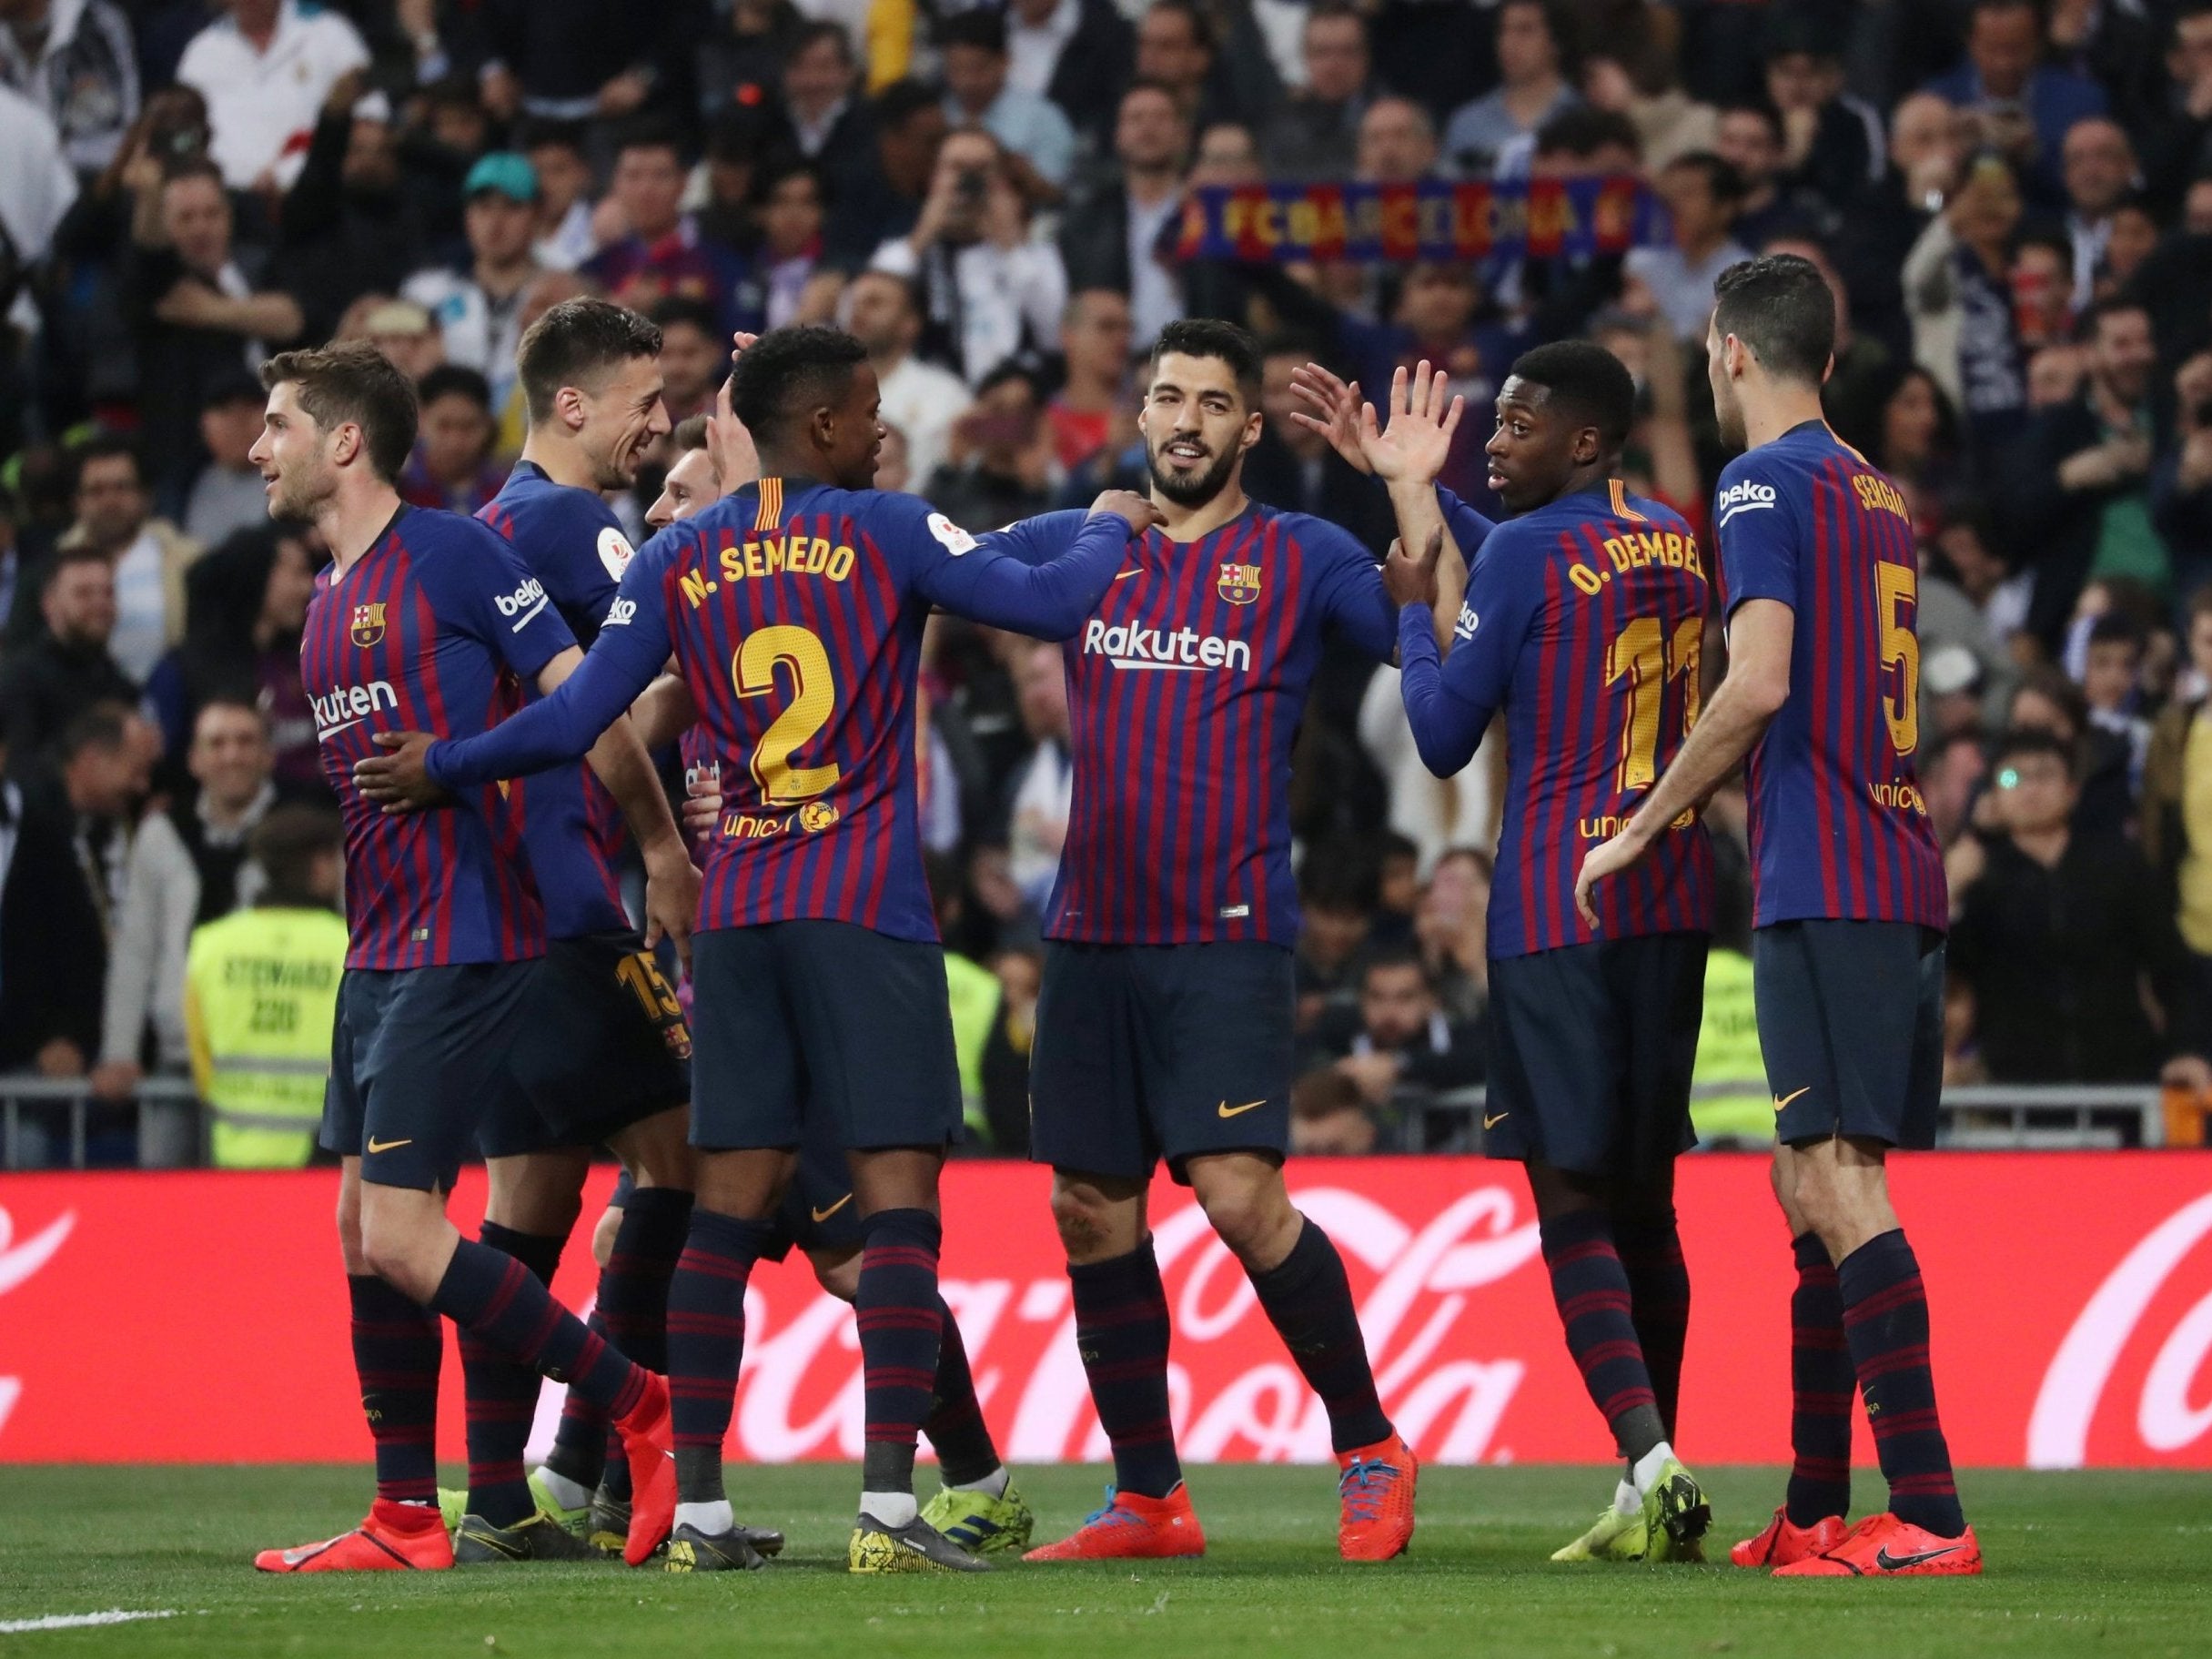 Barcelona reached yet another major final